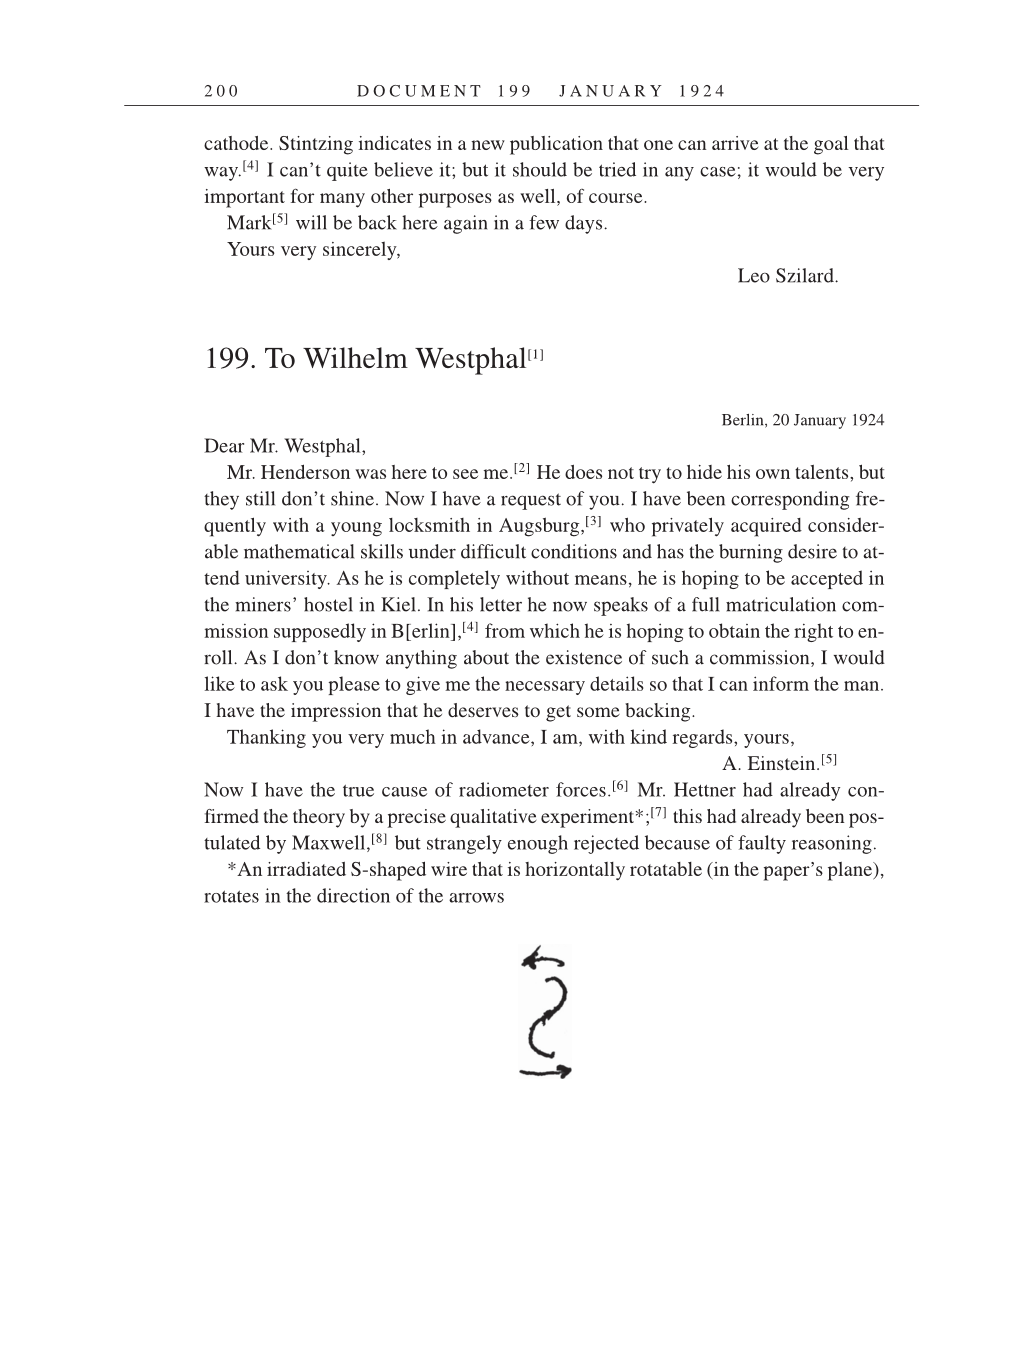 Volume 14: The Berlin Years: Writings & Correspondence, April 1923-May 1925 (English Translation Supplement) page 200